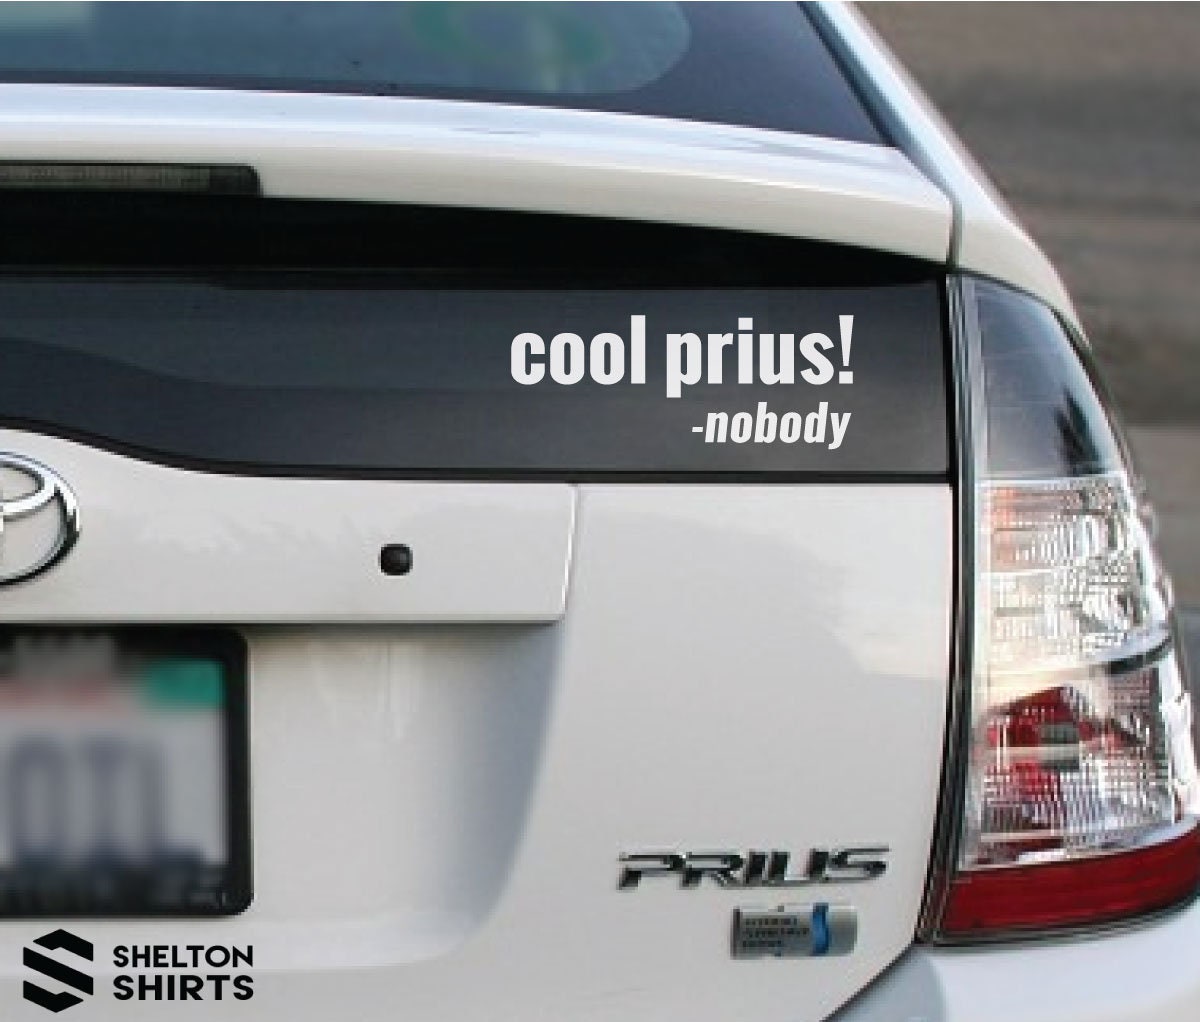 I was cool Vinyl Car Decal Sticker for Minivan, Station or Prius Wagon